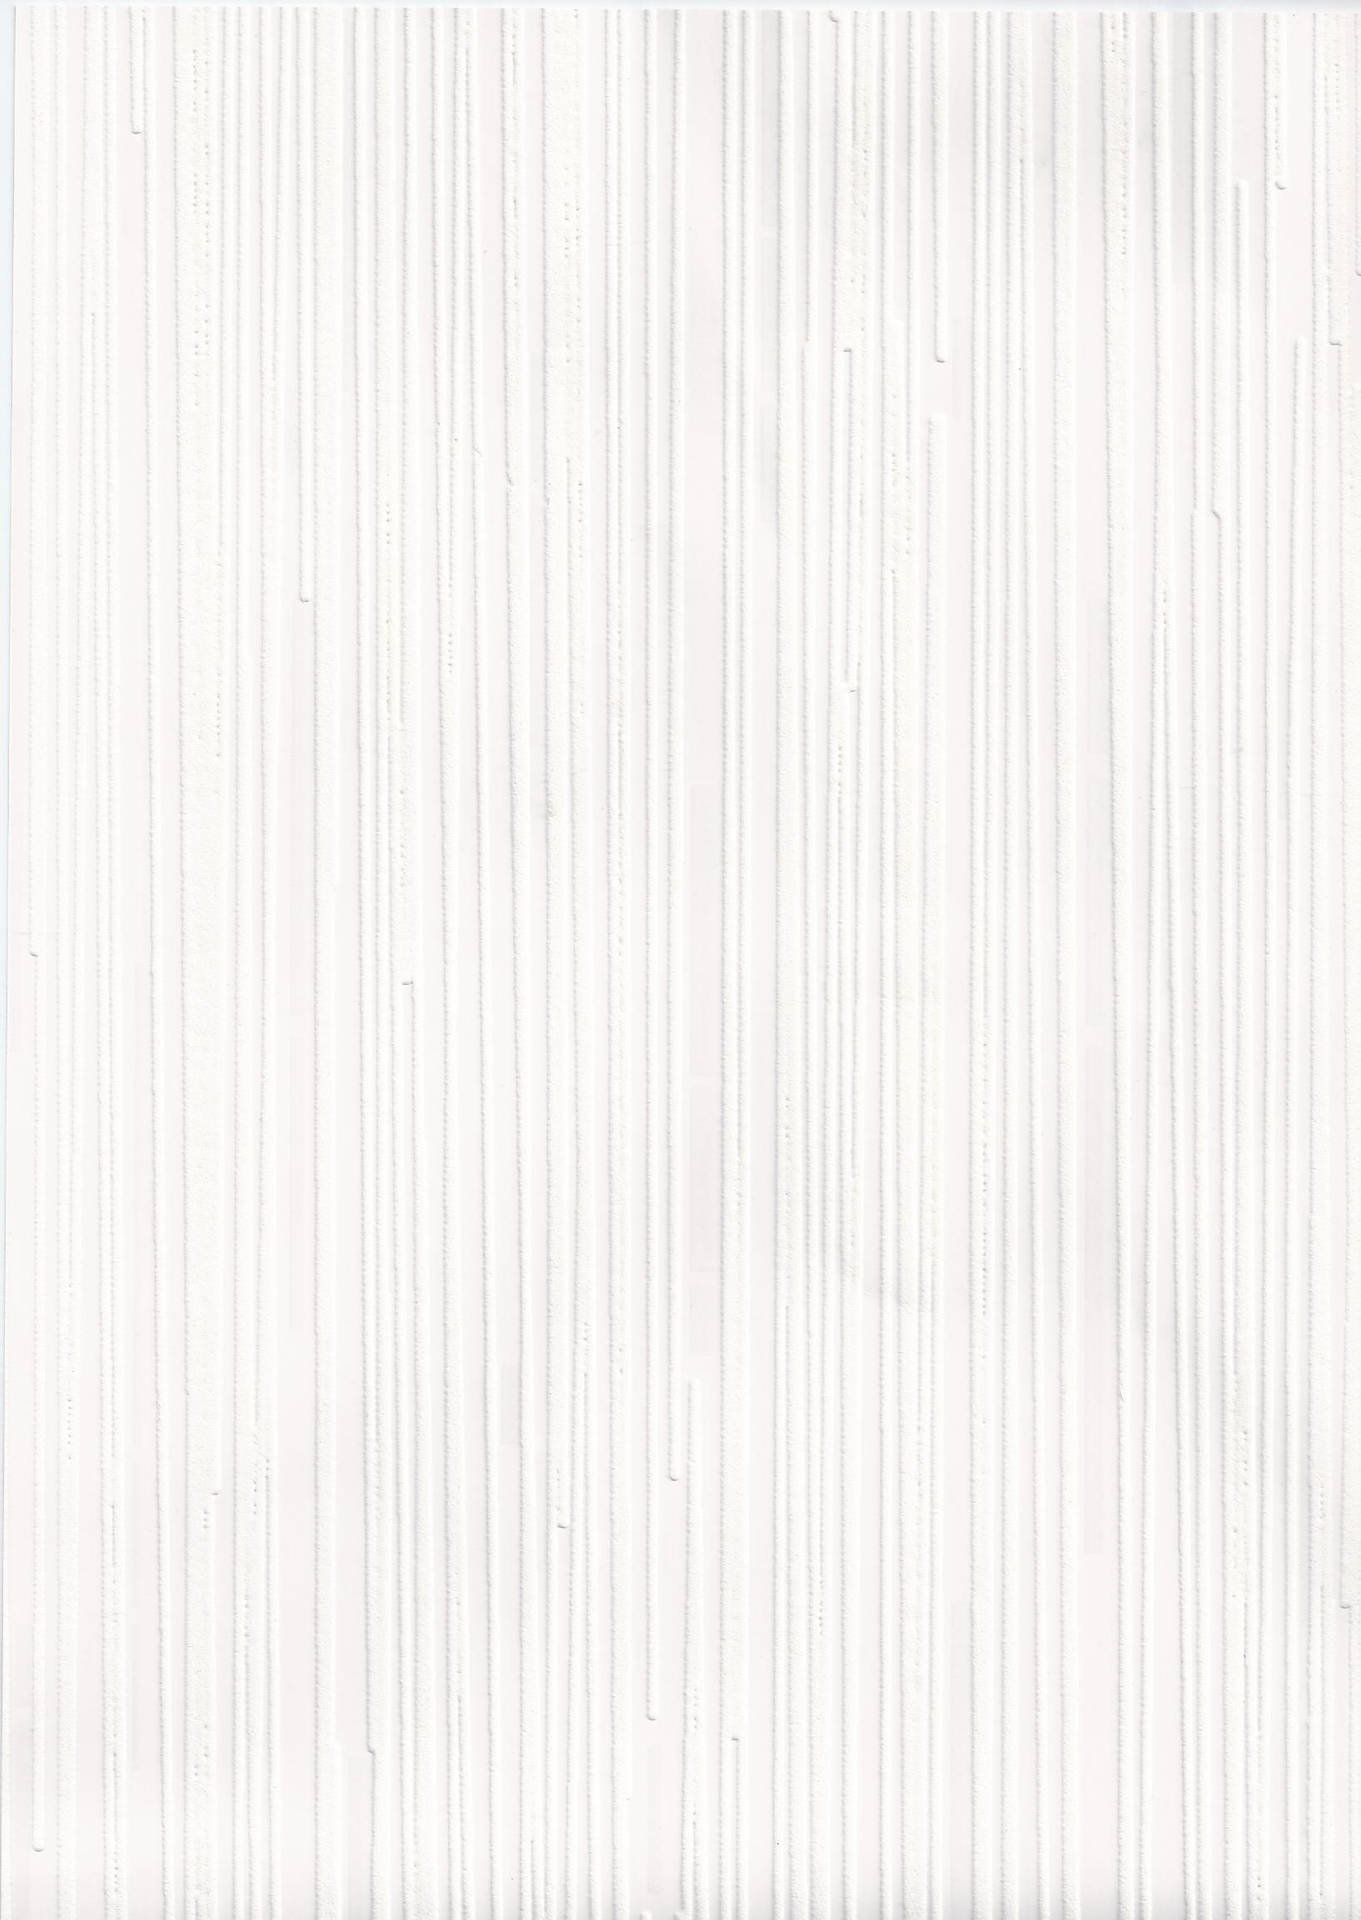 Blank White Vertical Grains Picture